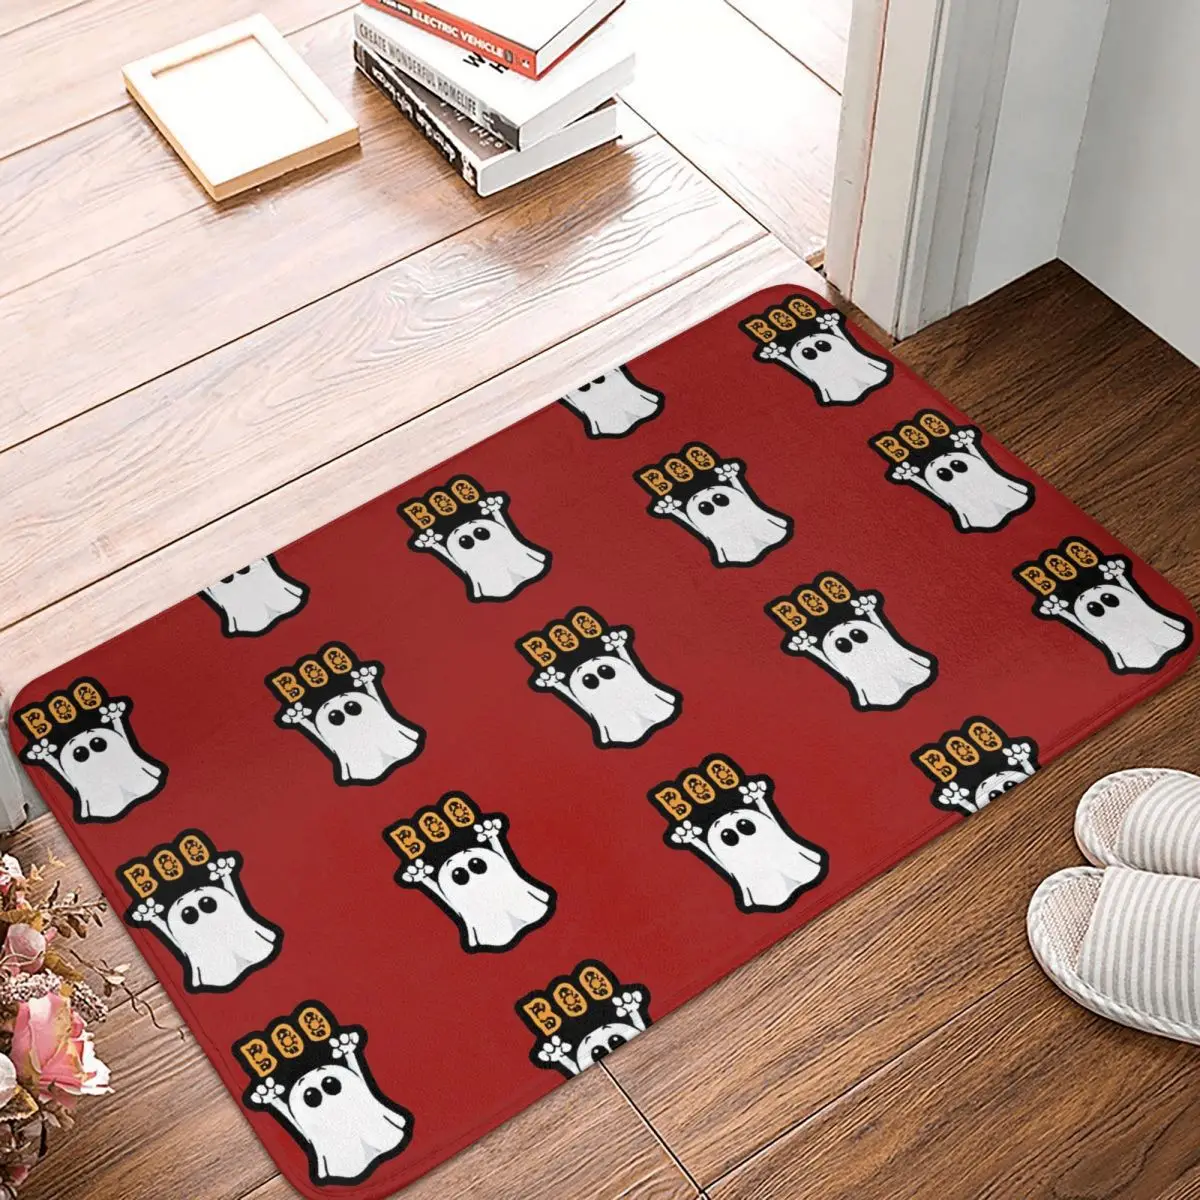 

Ghost of Disapproval Non-slip Doormat Red Boo Living Room Kitchen Mat Prayer Carpet Indoor Modern Decor